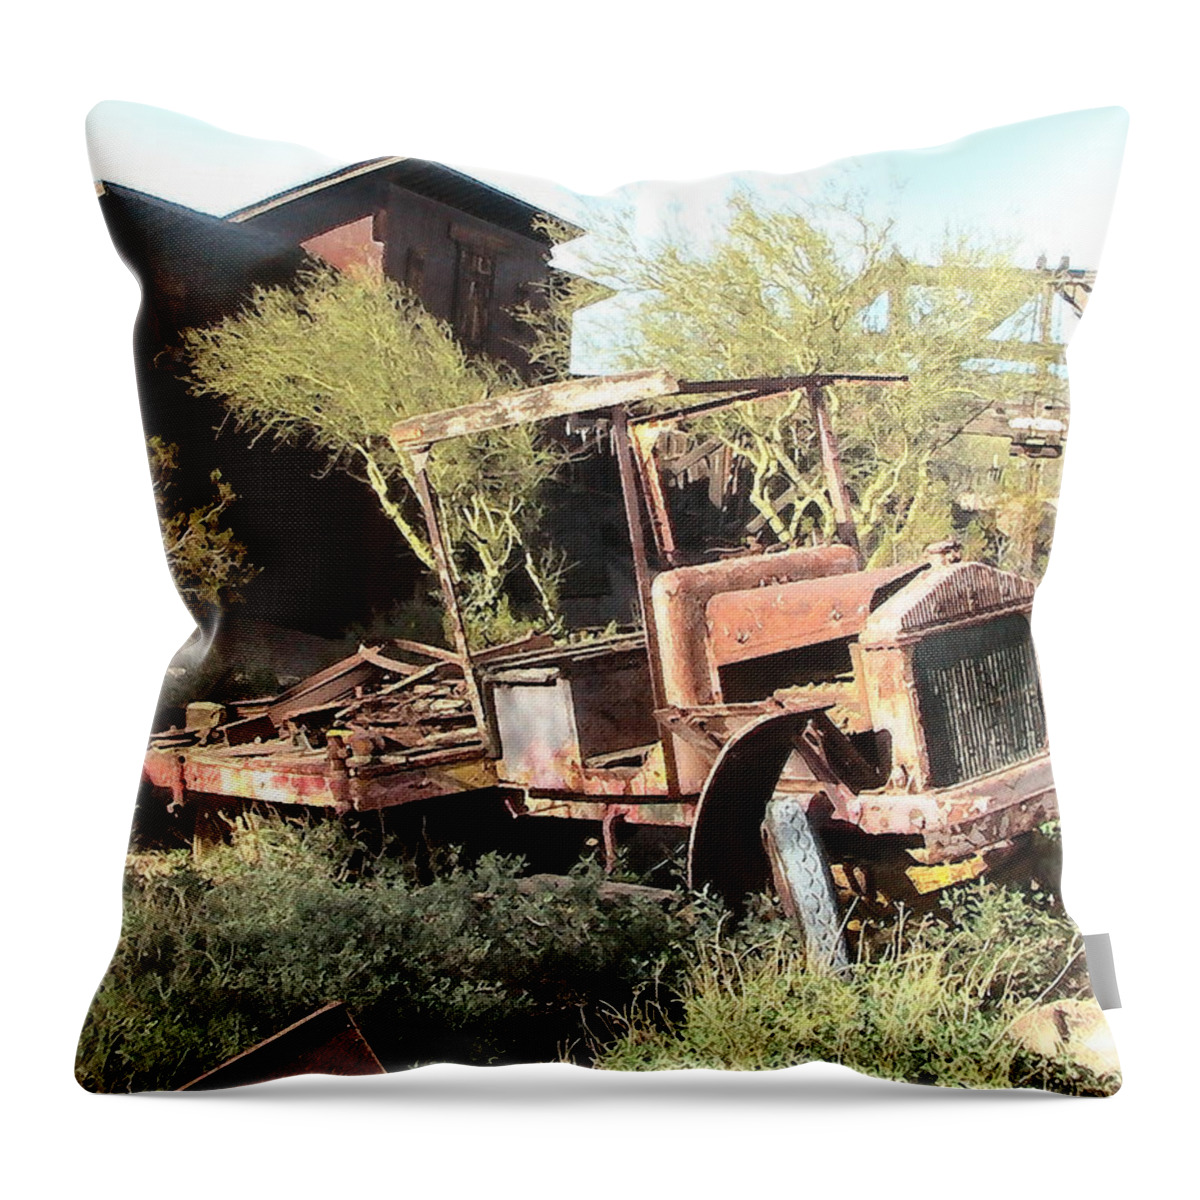 Cristopher Ernest Throw Pillow featuring the photograph A Place to Rest by Cristophers Dream Artistry